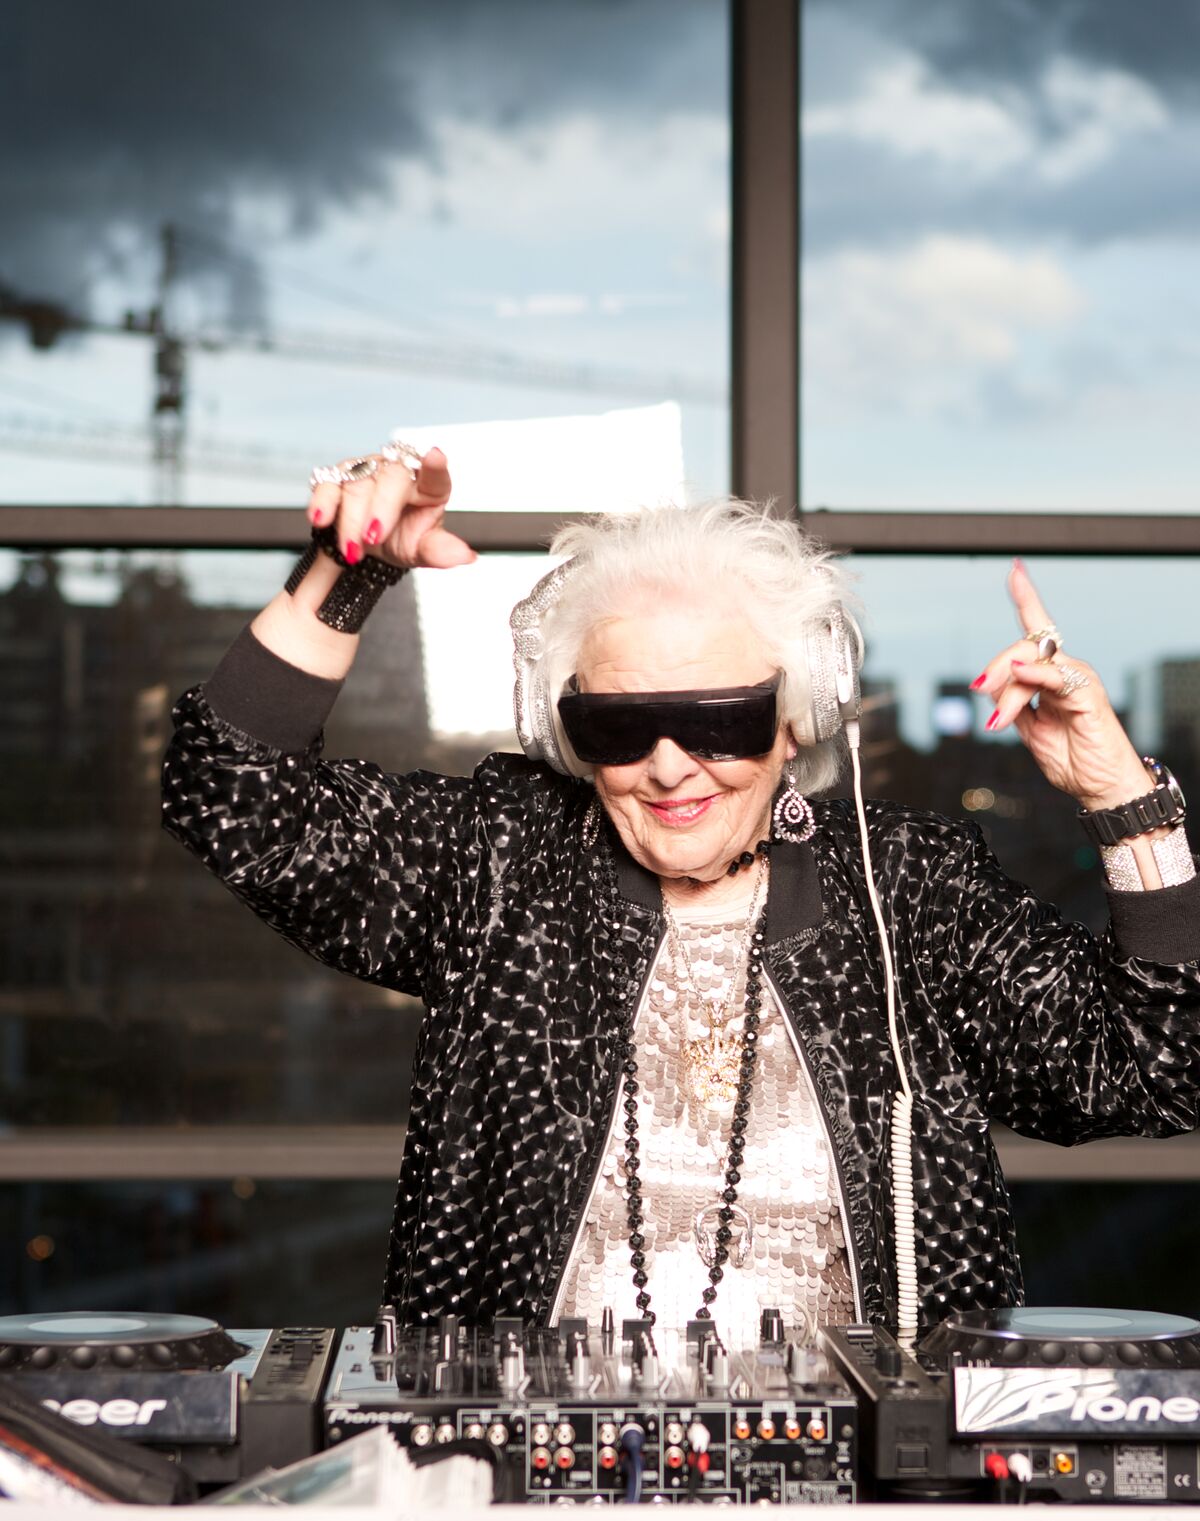 age of happiness, healthy elderly woman ruth flowers having fun as a DJ